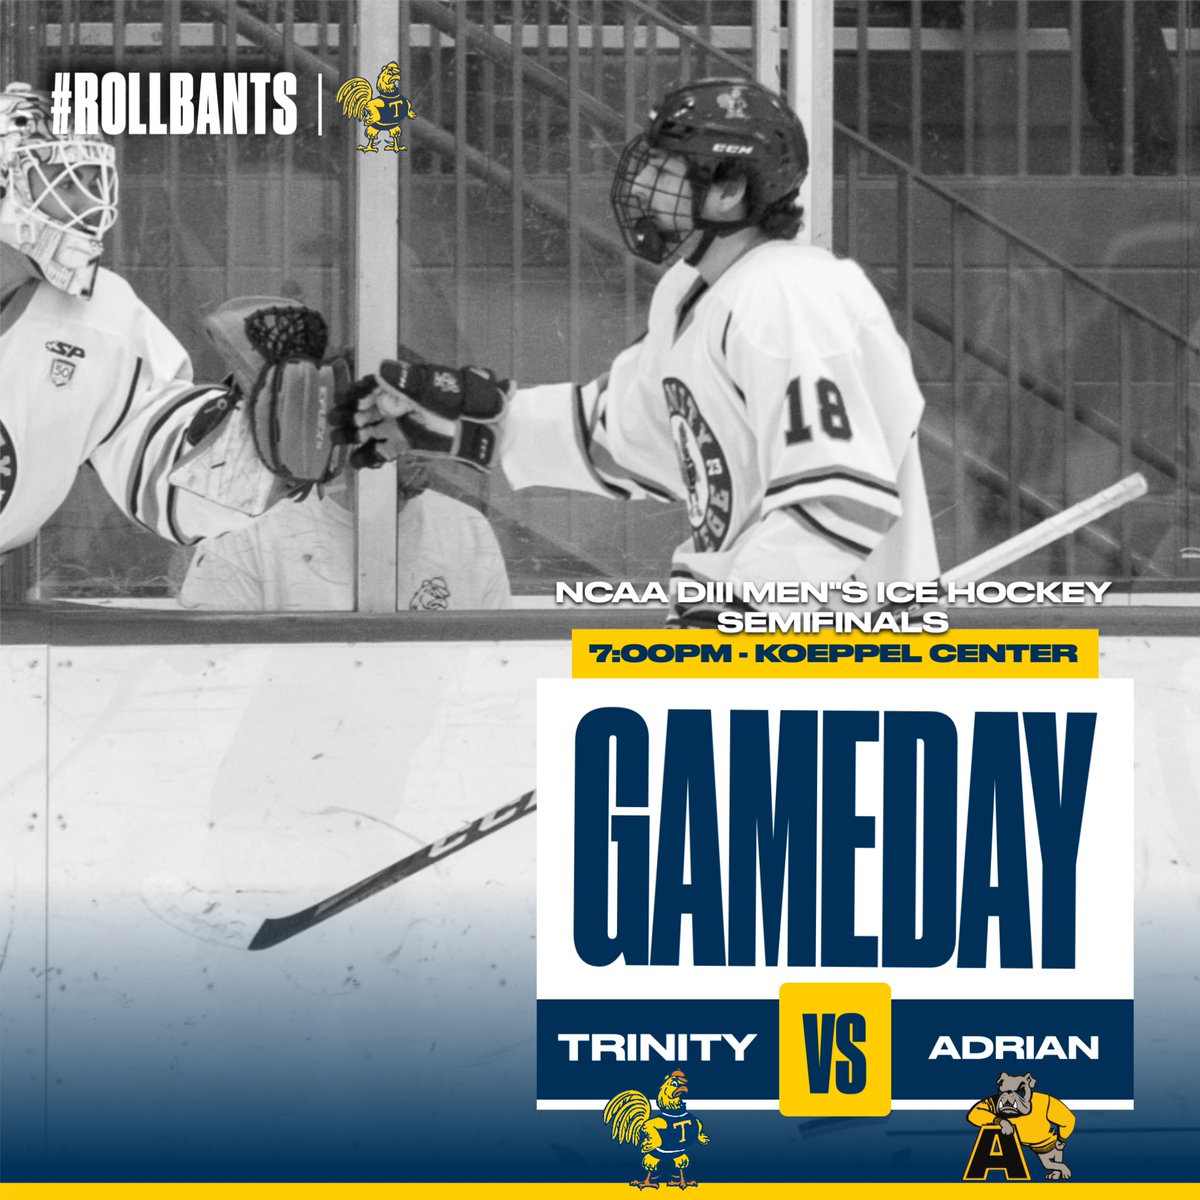 M🏒| @TCBantamsHockey will take the ice for a 7PM game against Adrian in the NCAA DIII Semifinals in Koeppel Community Center #RollBants🐓 🆚 @AdrianBulldogs 📍 Koeppel Center ⏰ 7:00PM 📺 ncaa.com/game/6284738